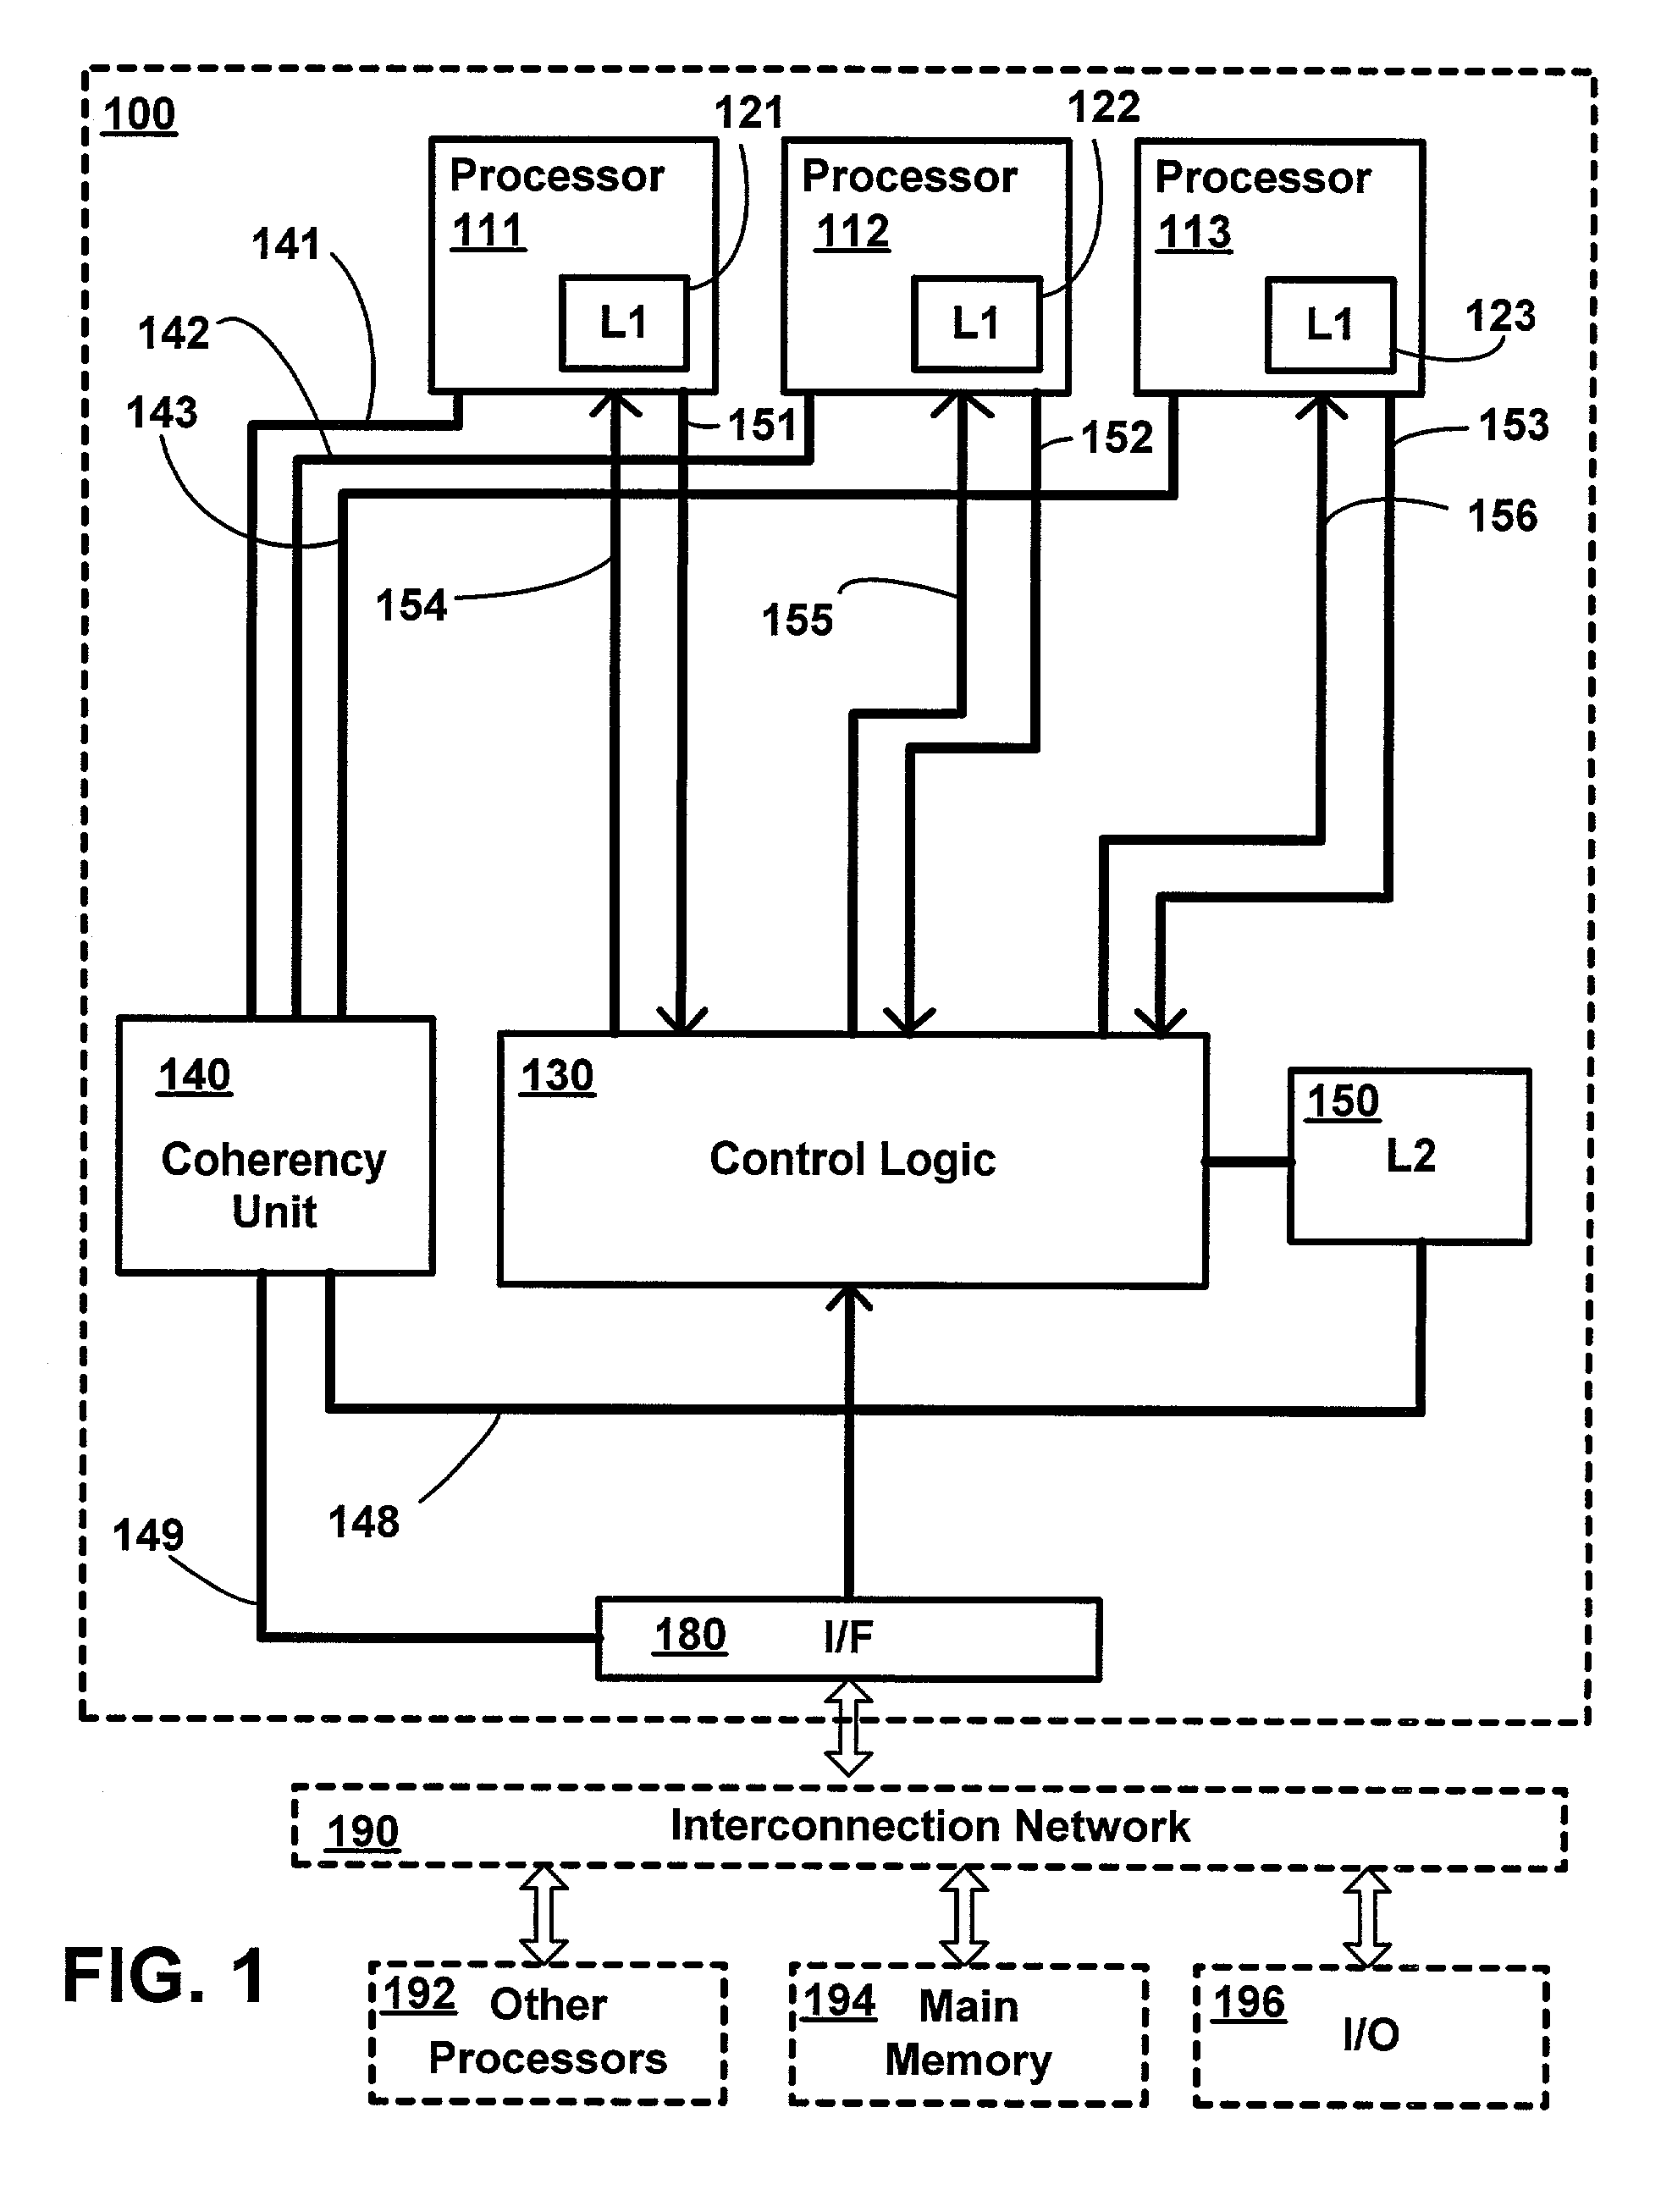 Transfer of cache lines on-chip between processing cores in a multi-core system